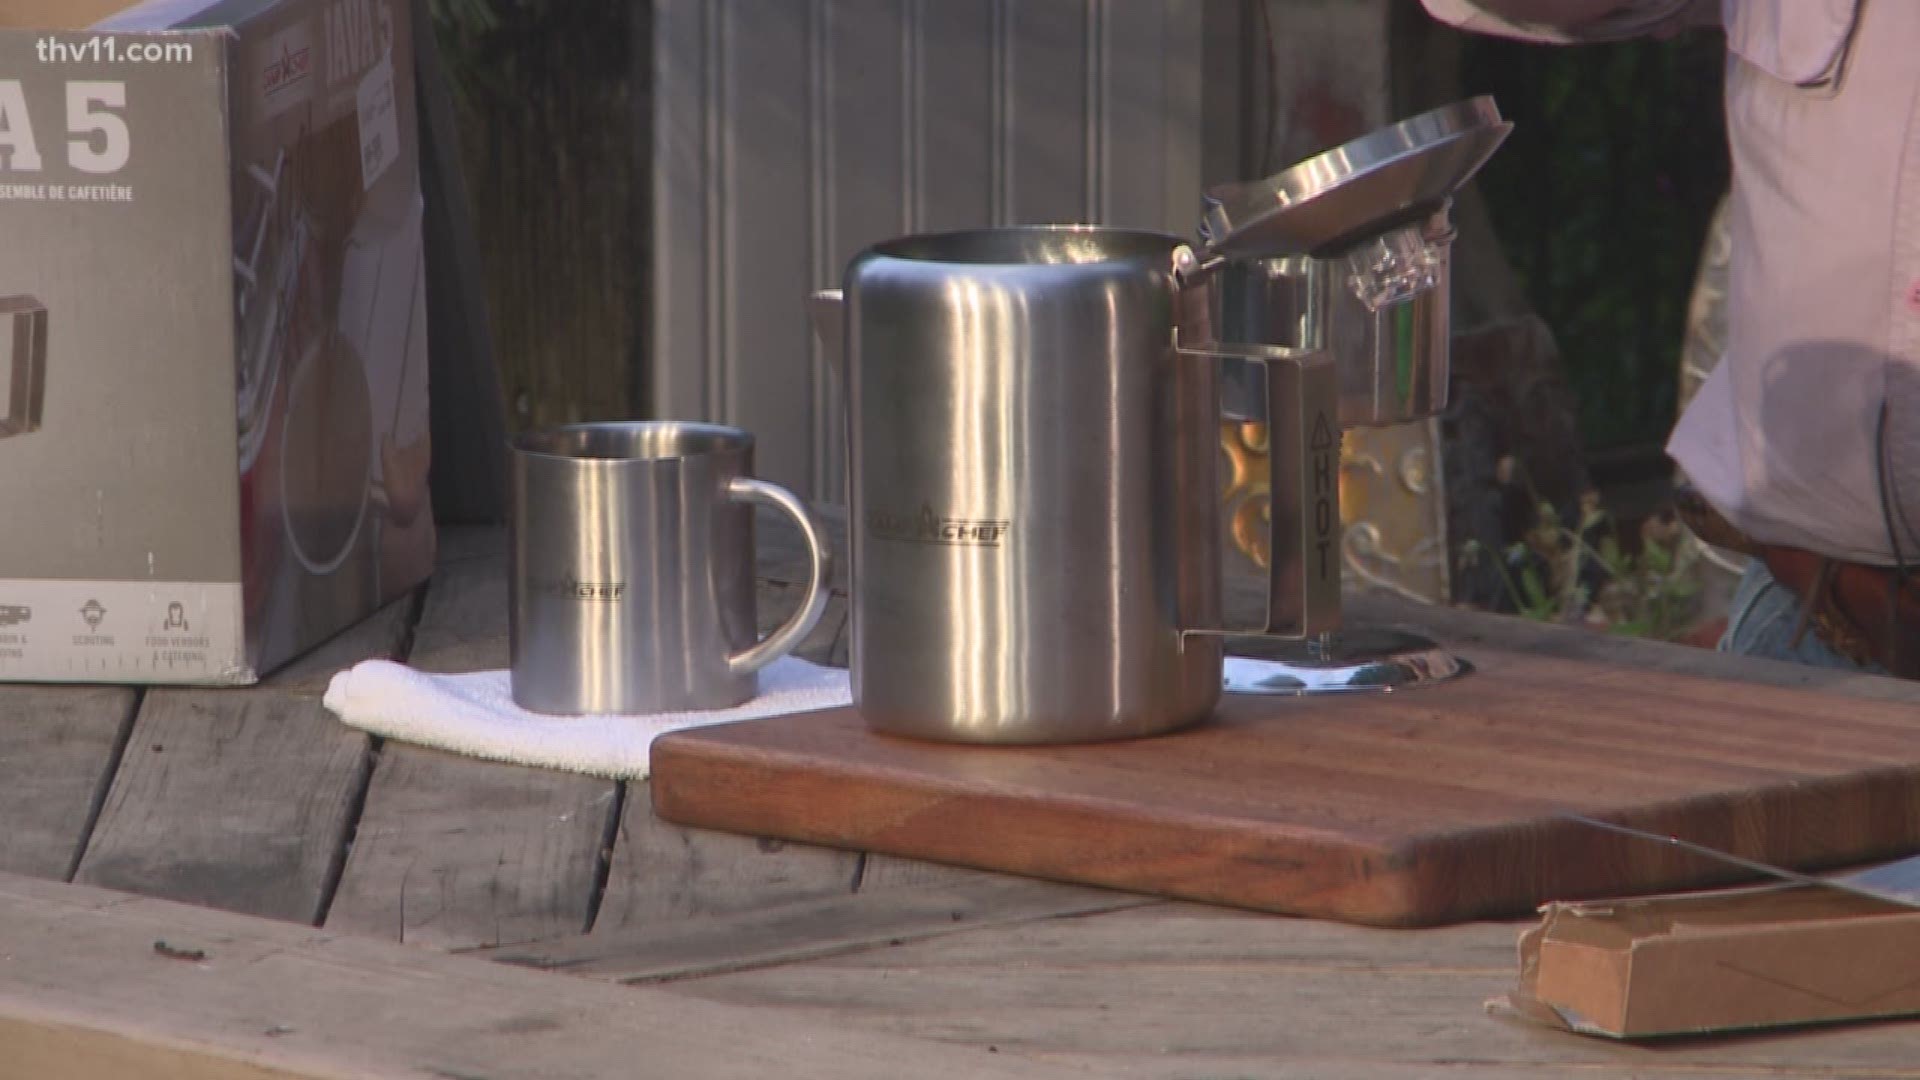 Anthony Michael shows us some handy tools to take out on a camping trip.